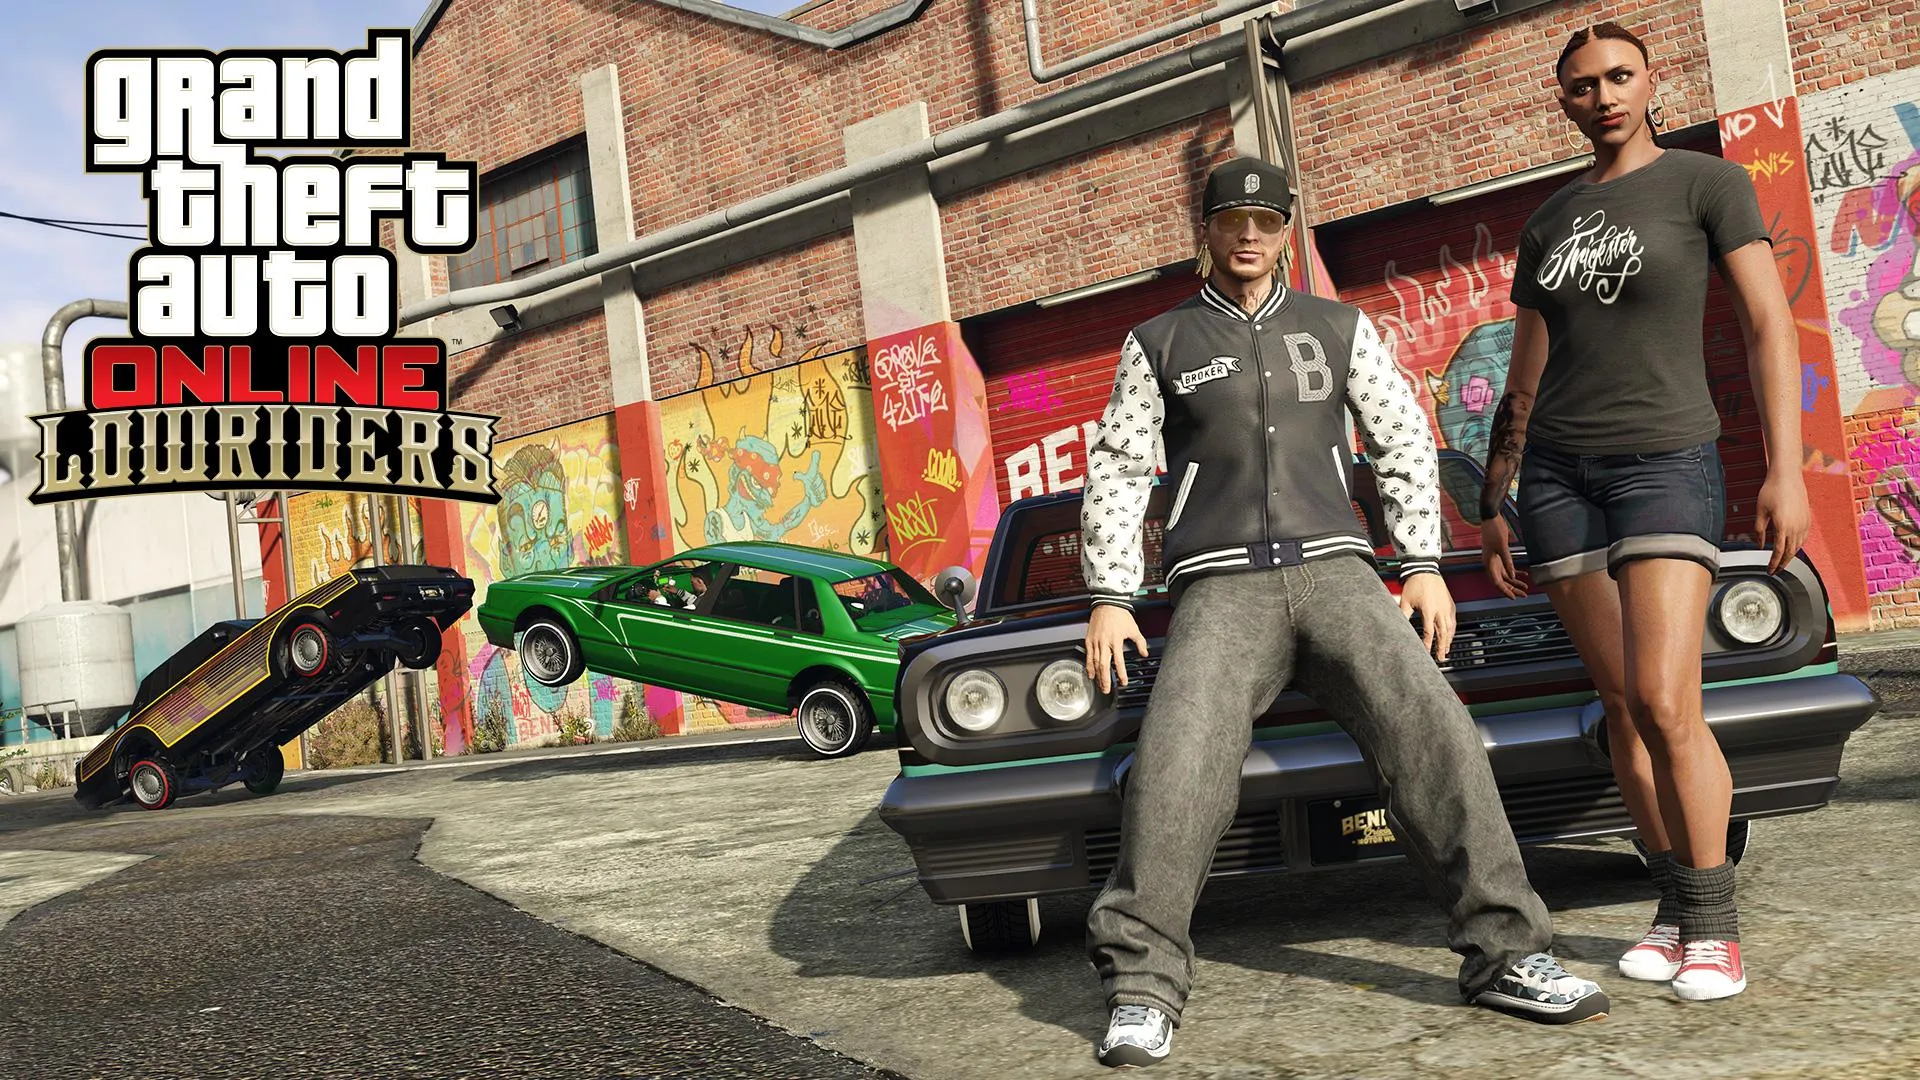 GTA Online: Lowriders Update Now Available